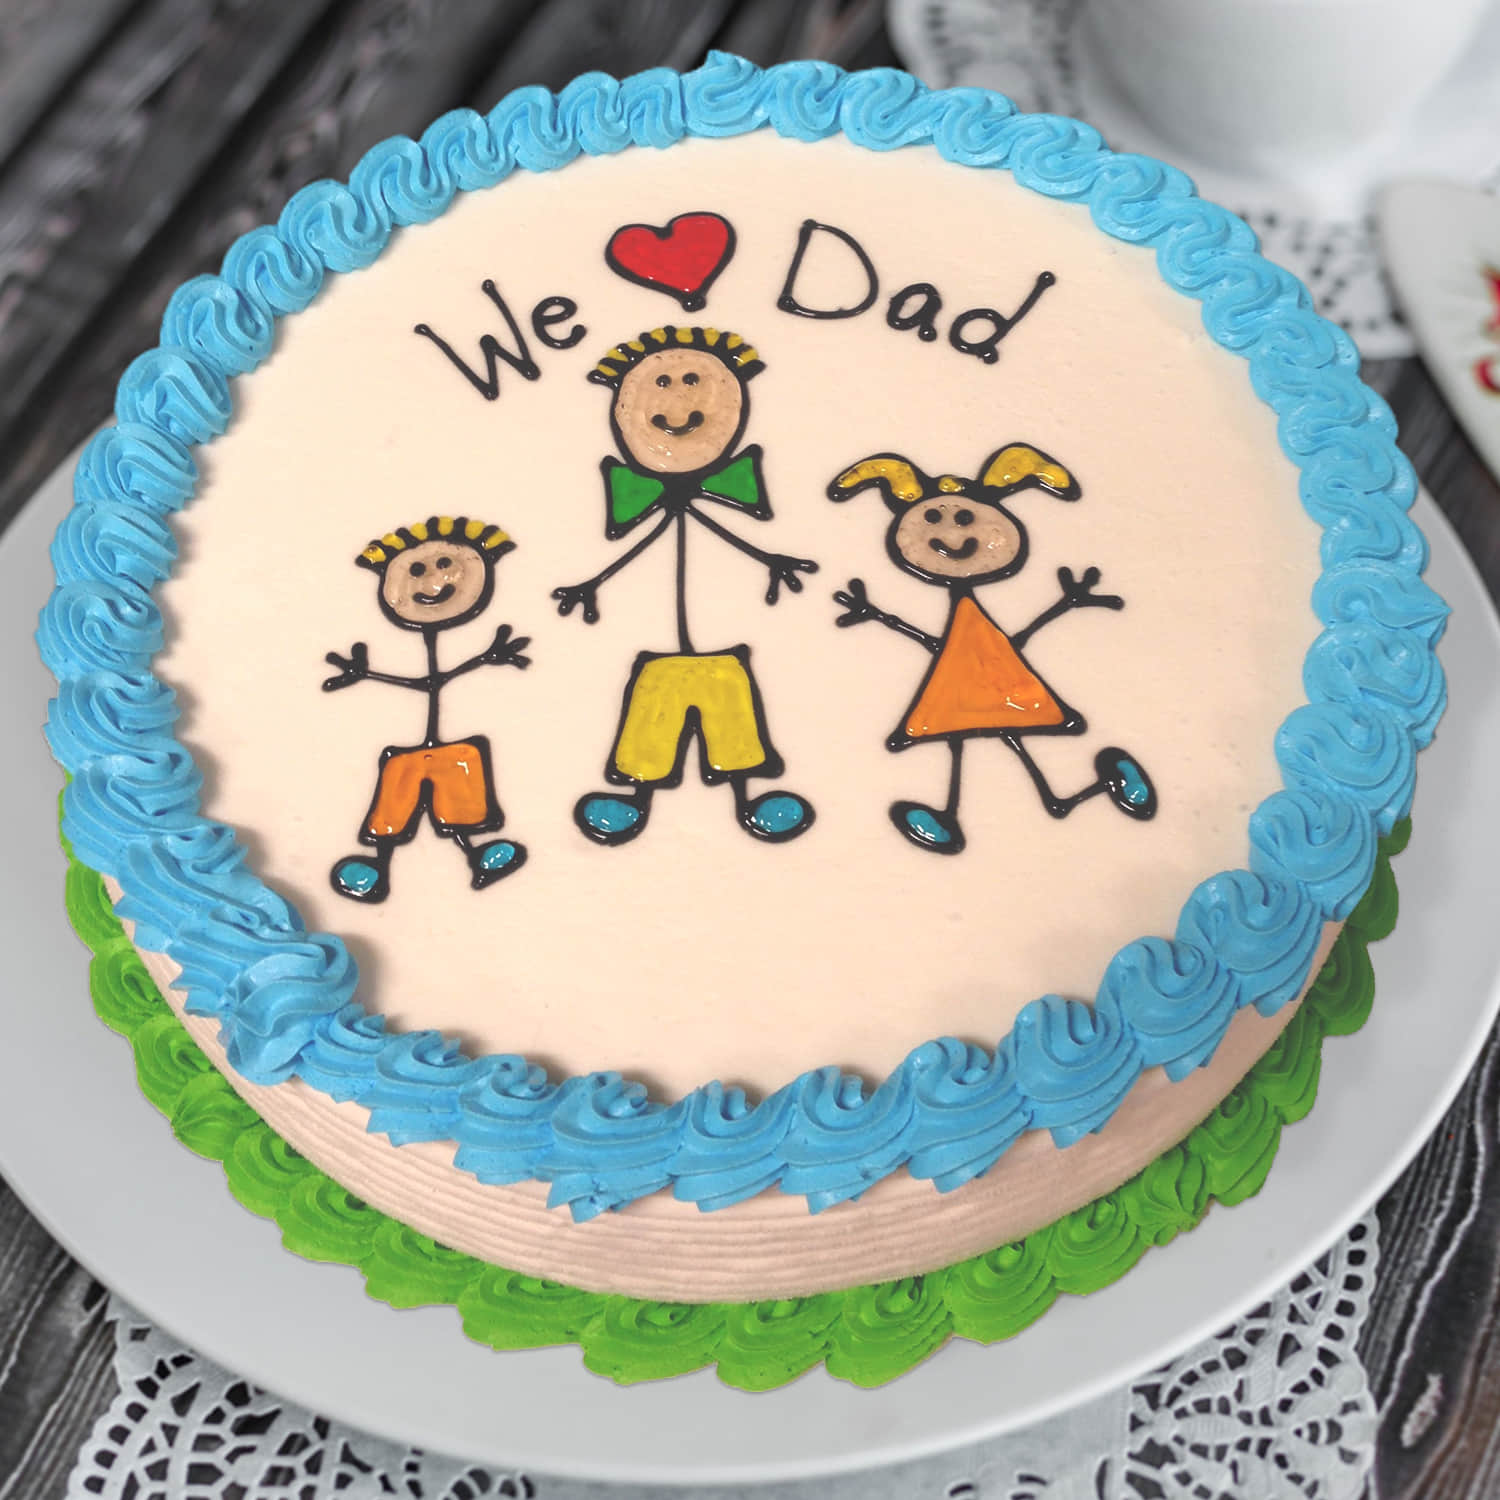 Jenn Cupcakes & Muffins: Cake for Dad and Daughter